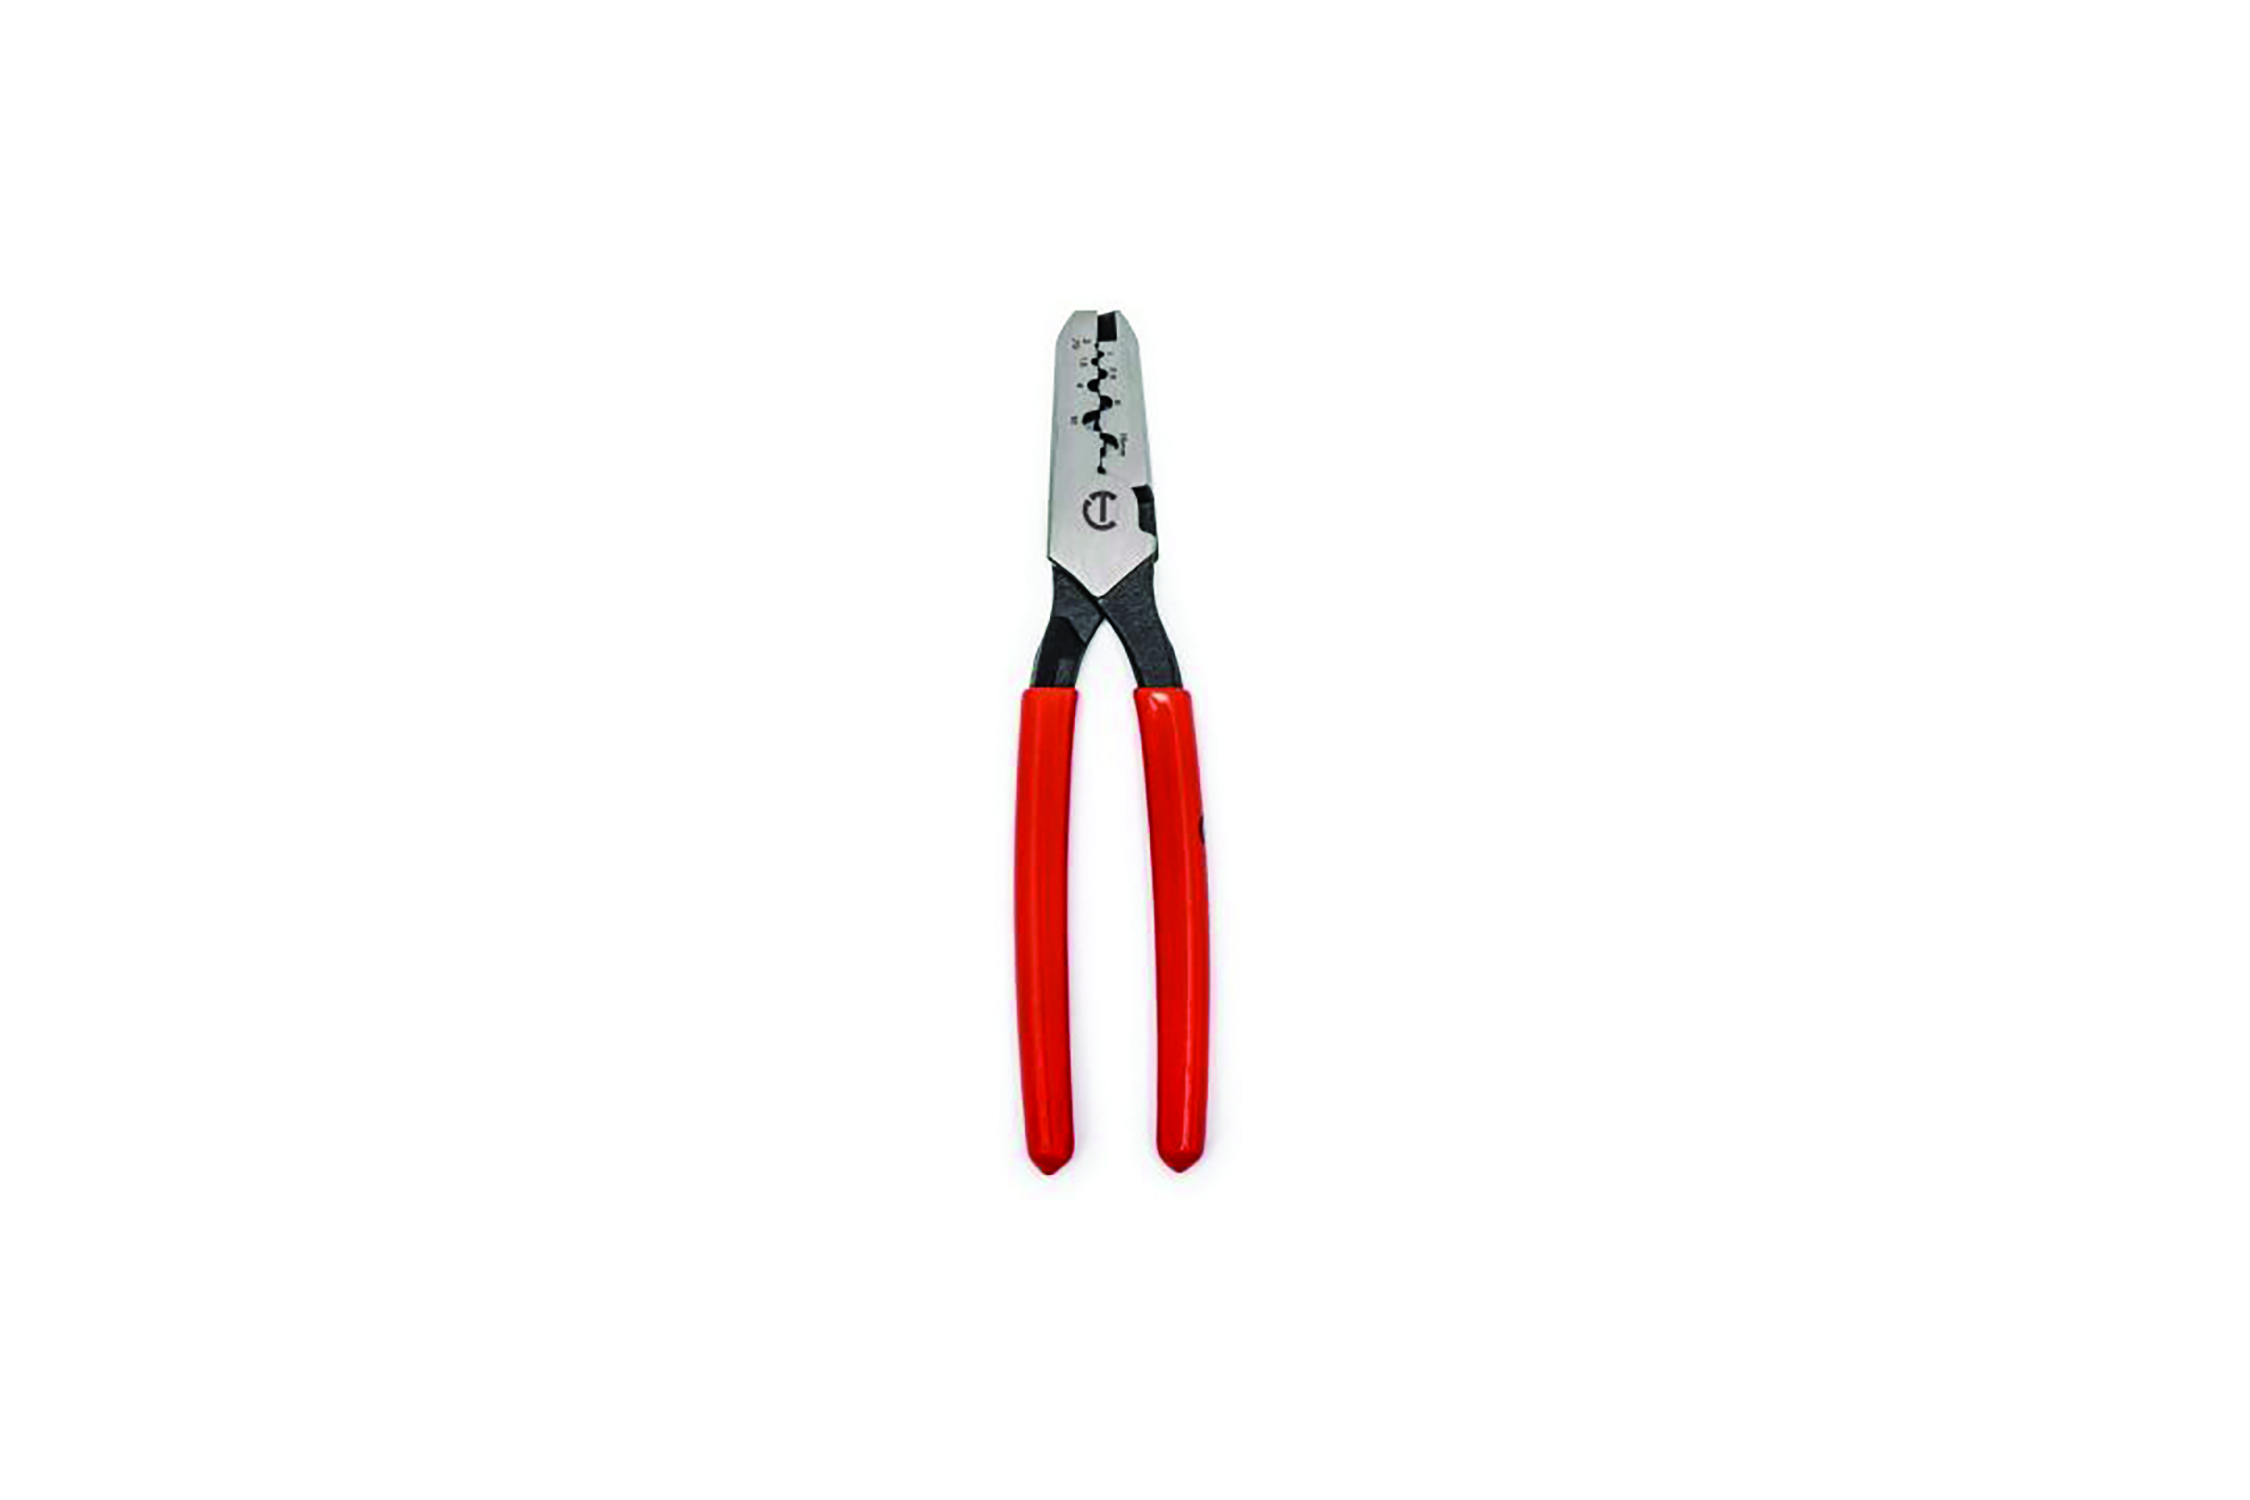 Wire crimper with red handles. Image by Crescent Tool.